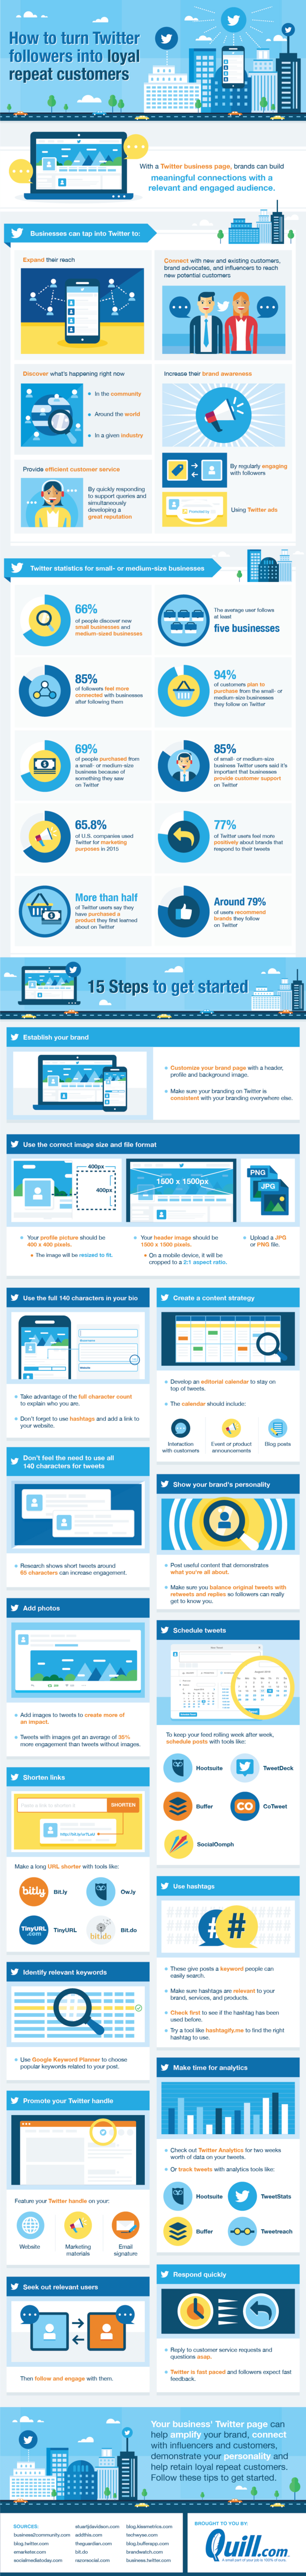 How to Turn Twitter Followers into Loyal Repeat Customers - #infographic